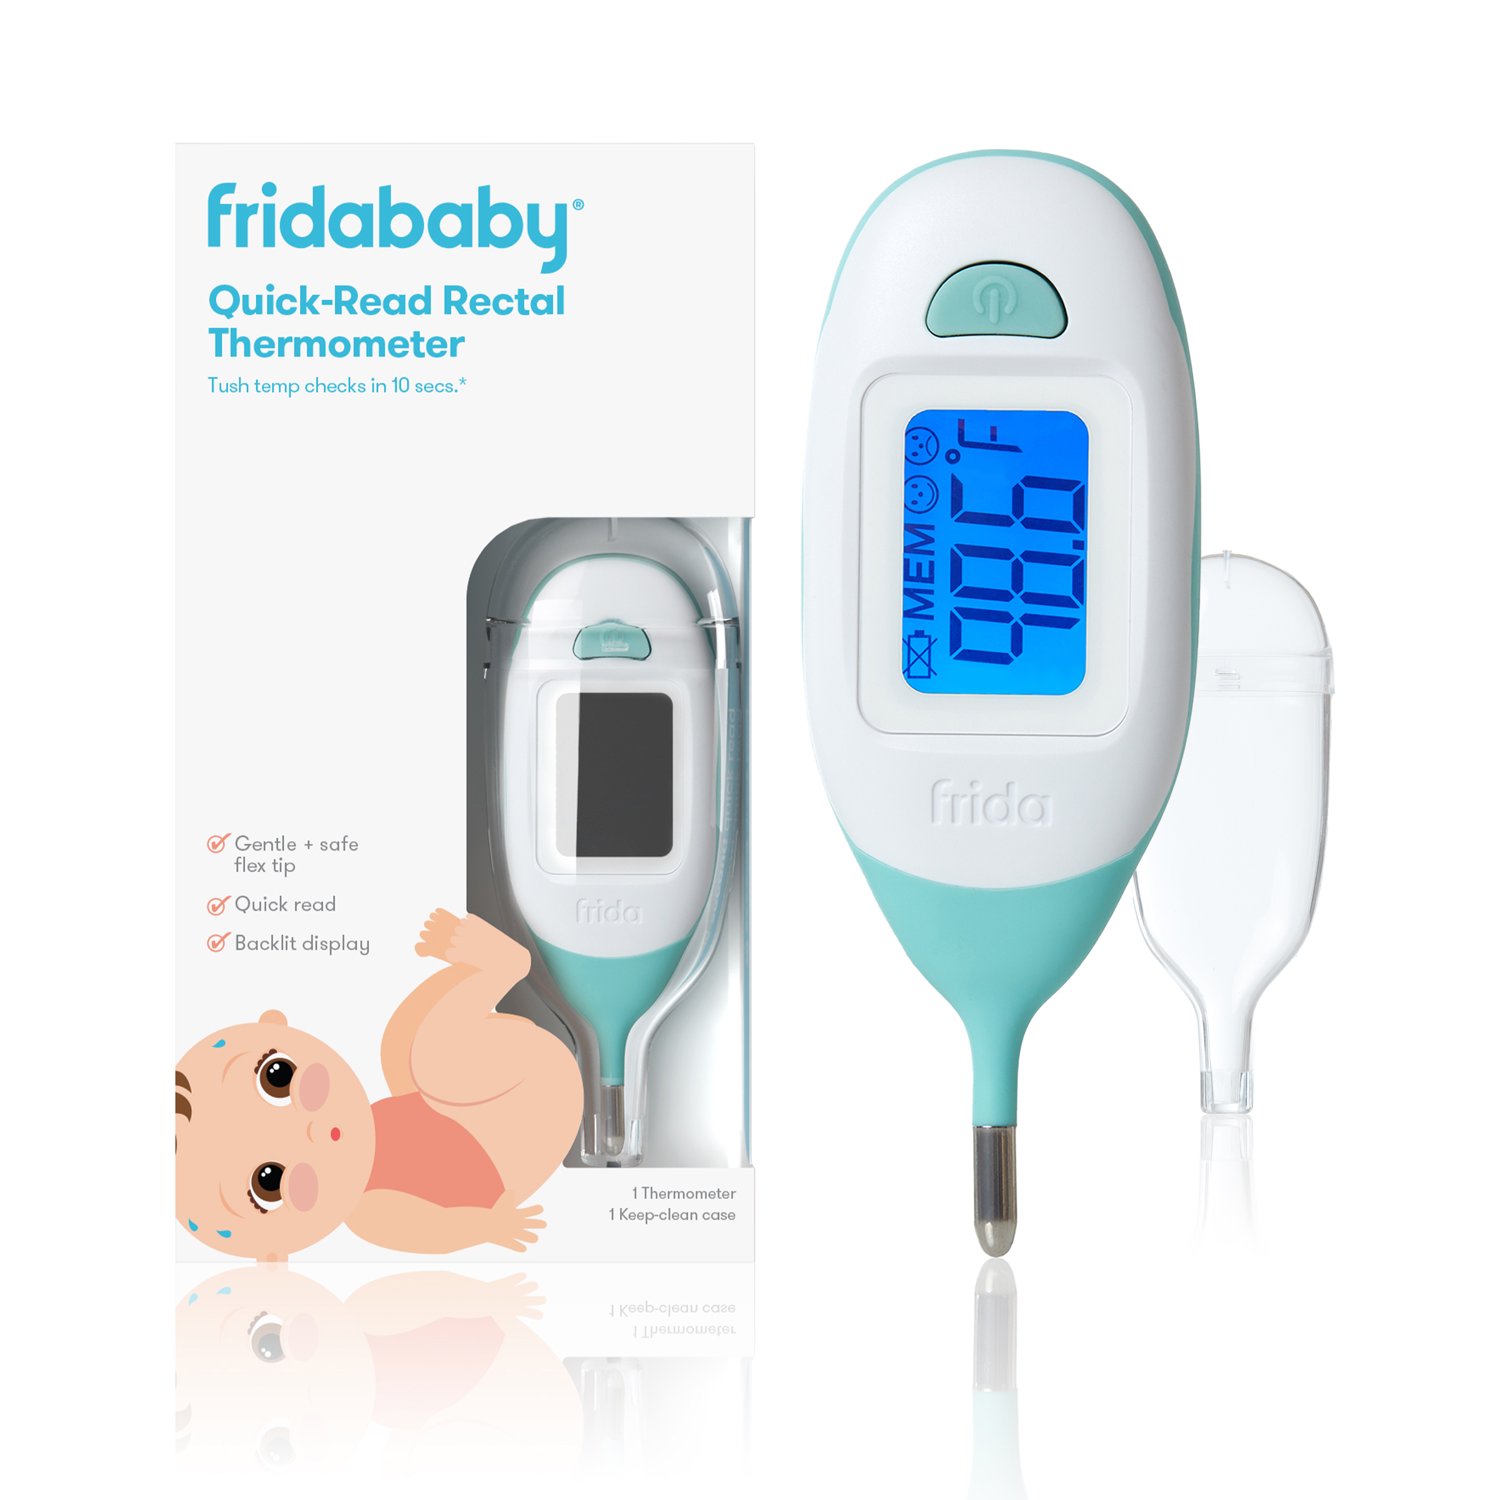 Frida Baby Quick-Read Digital Rectal Thermometer for Accurate Infant Temperature Readings - image 1 of 11